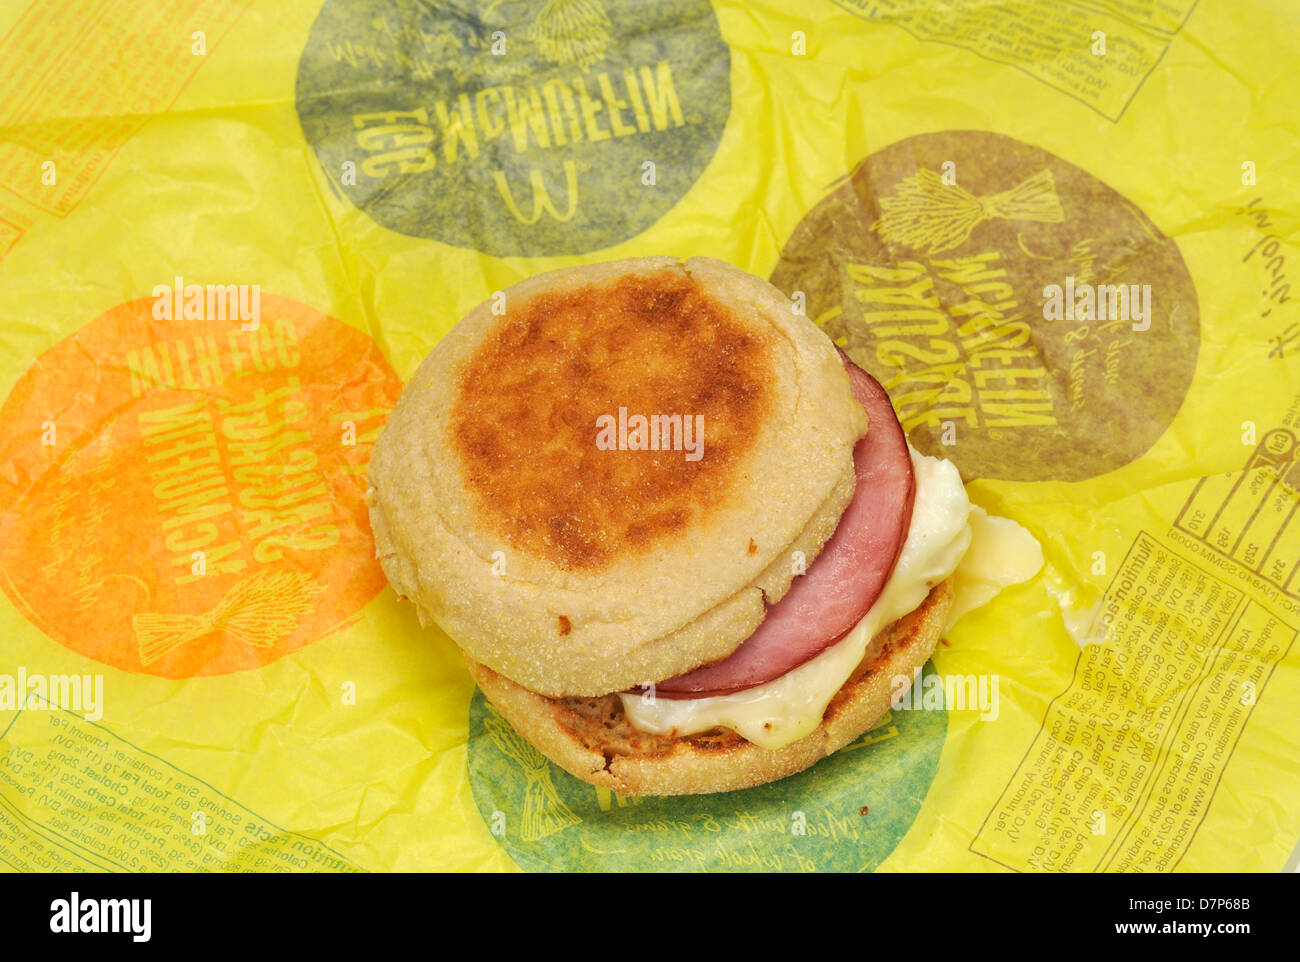 McDonald's Egg White Delight McMuffin breakfast sandwich on paper wrapper, cut out. USA Stock Photo